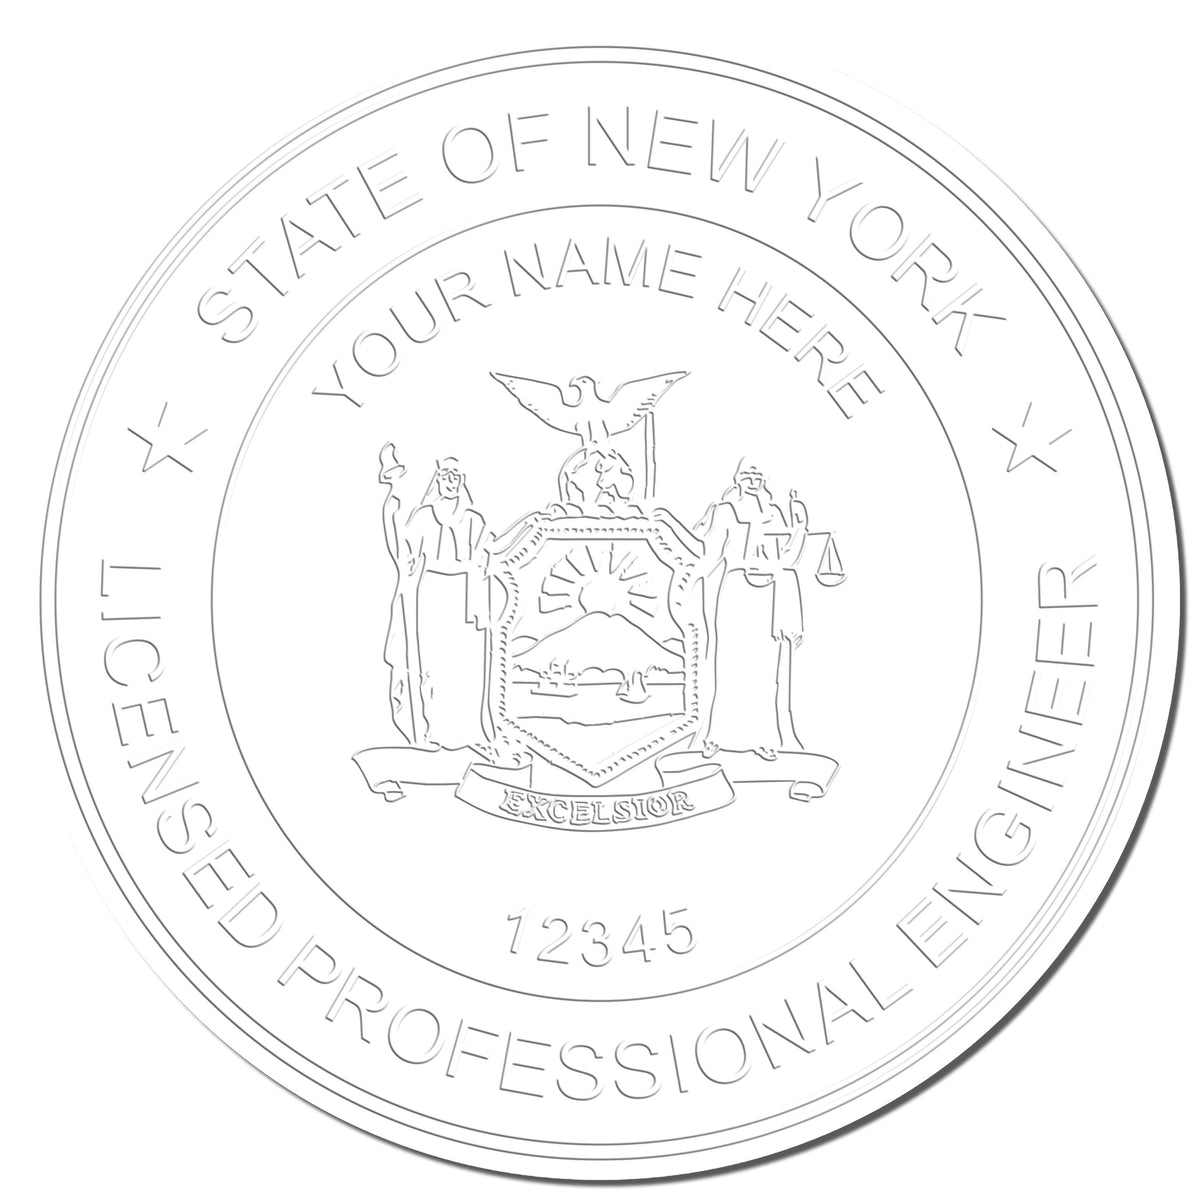 This paper is stamped with a sample imprint of the Hybrid New York Engineer Seal, signifying its quality and reliability.